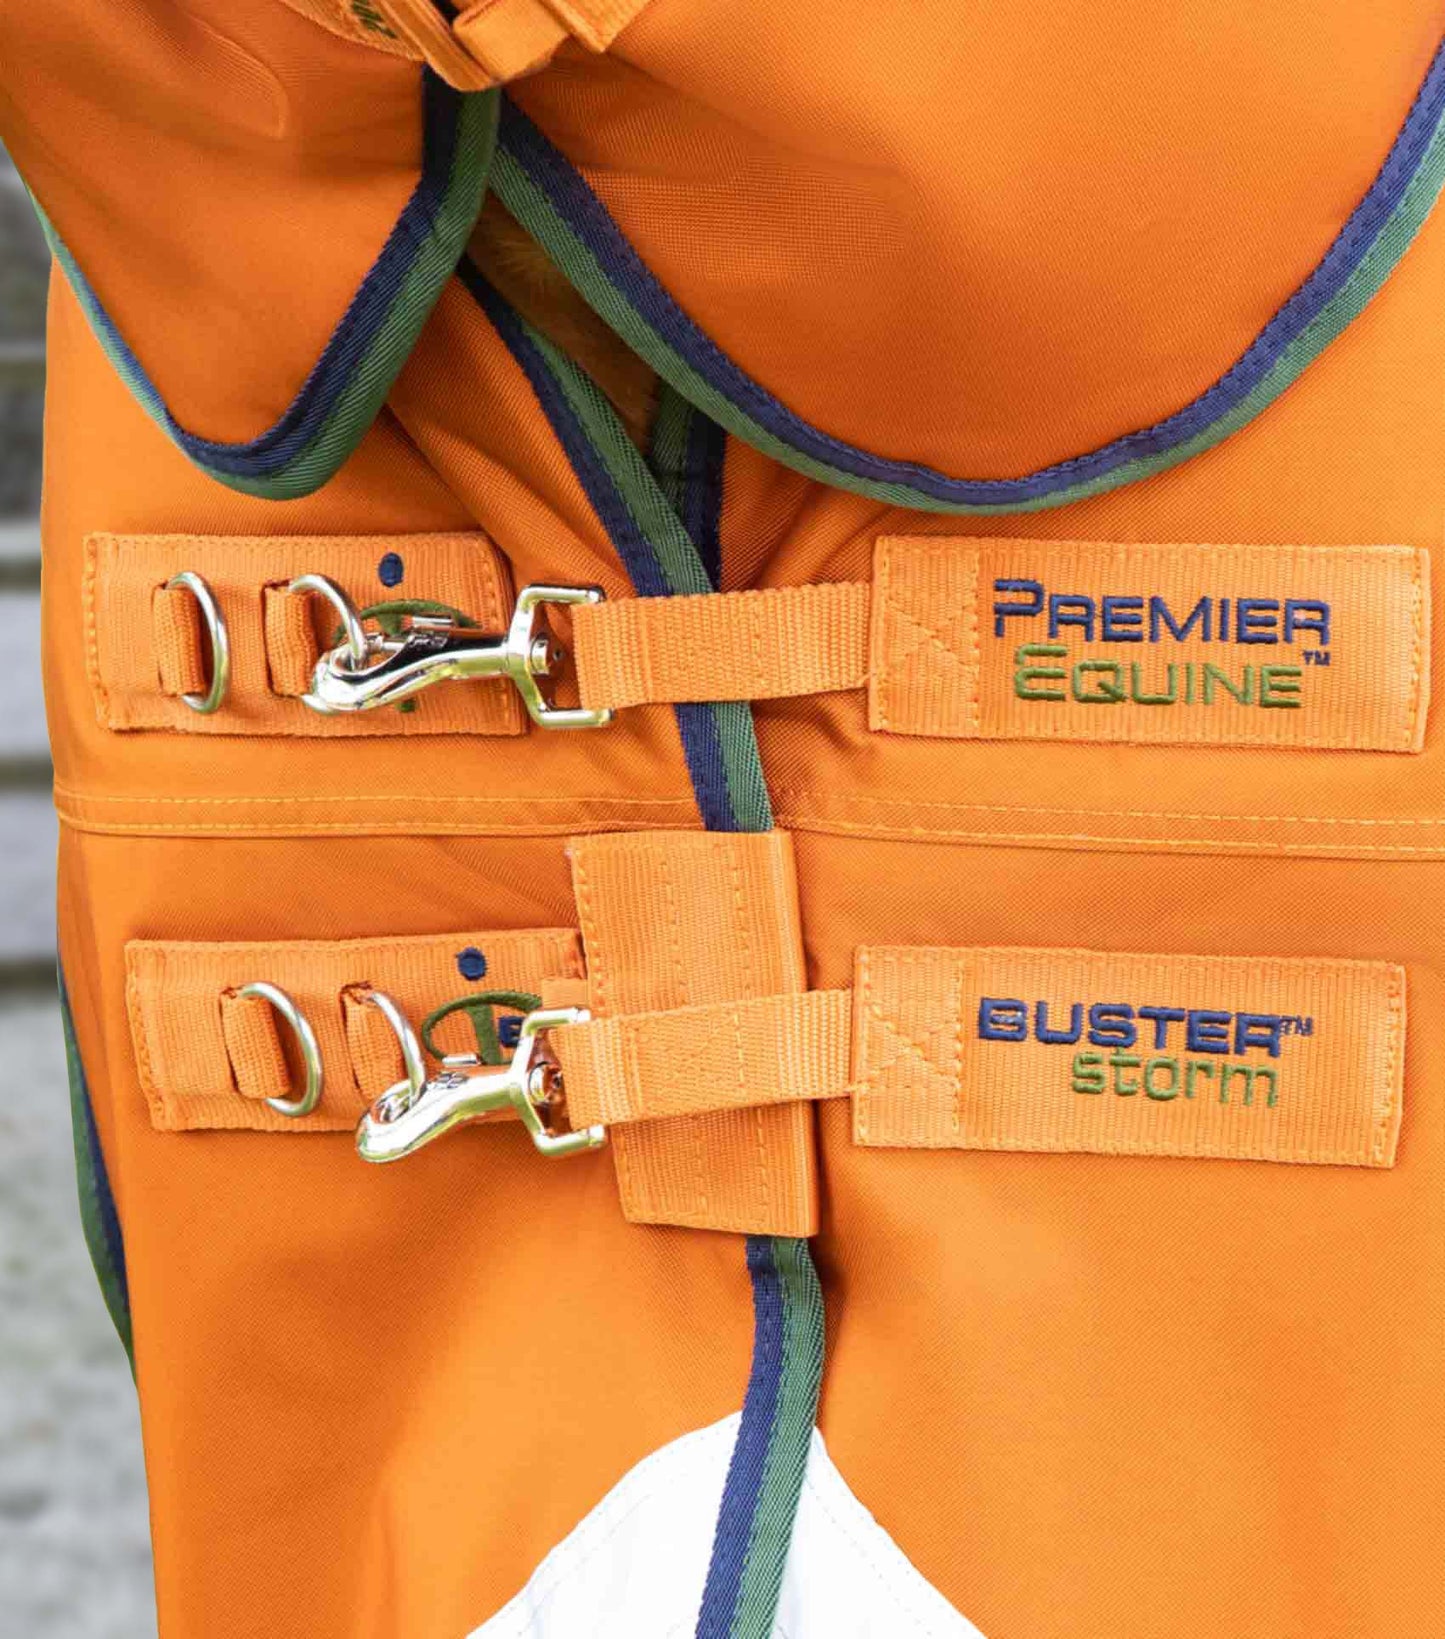 Premier Equine Buster 400g Turnout  Combo classic neck